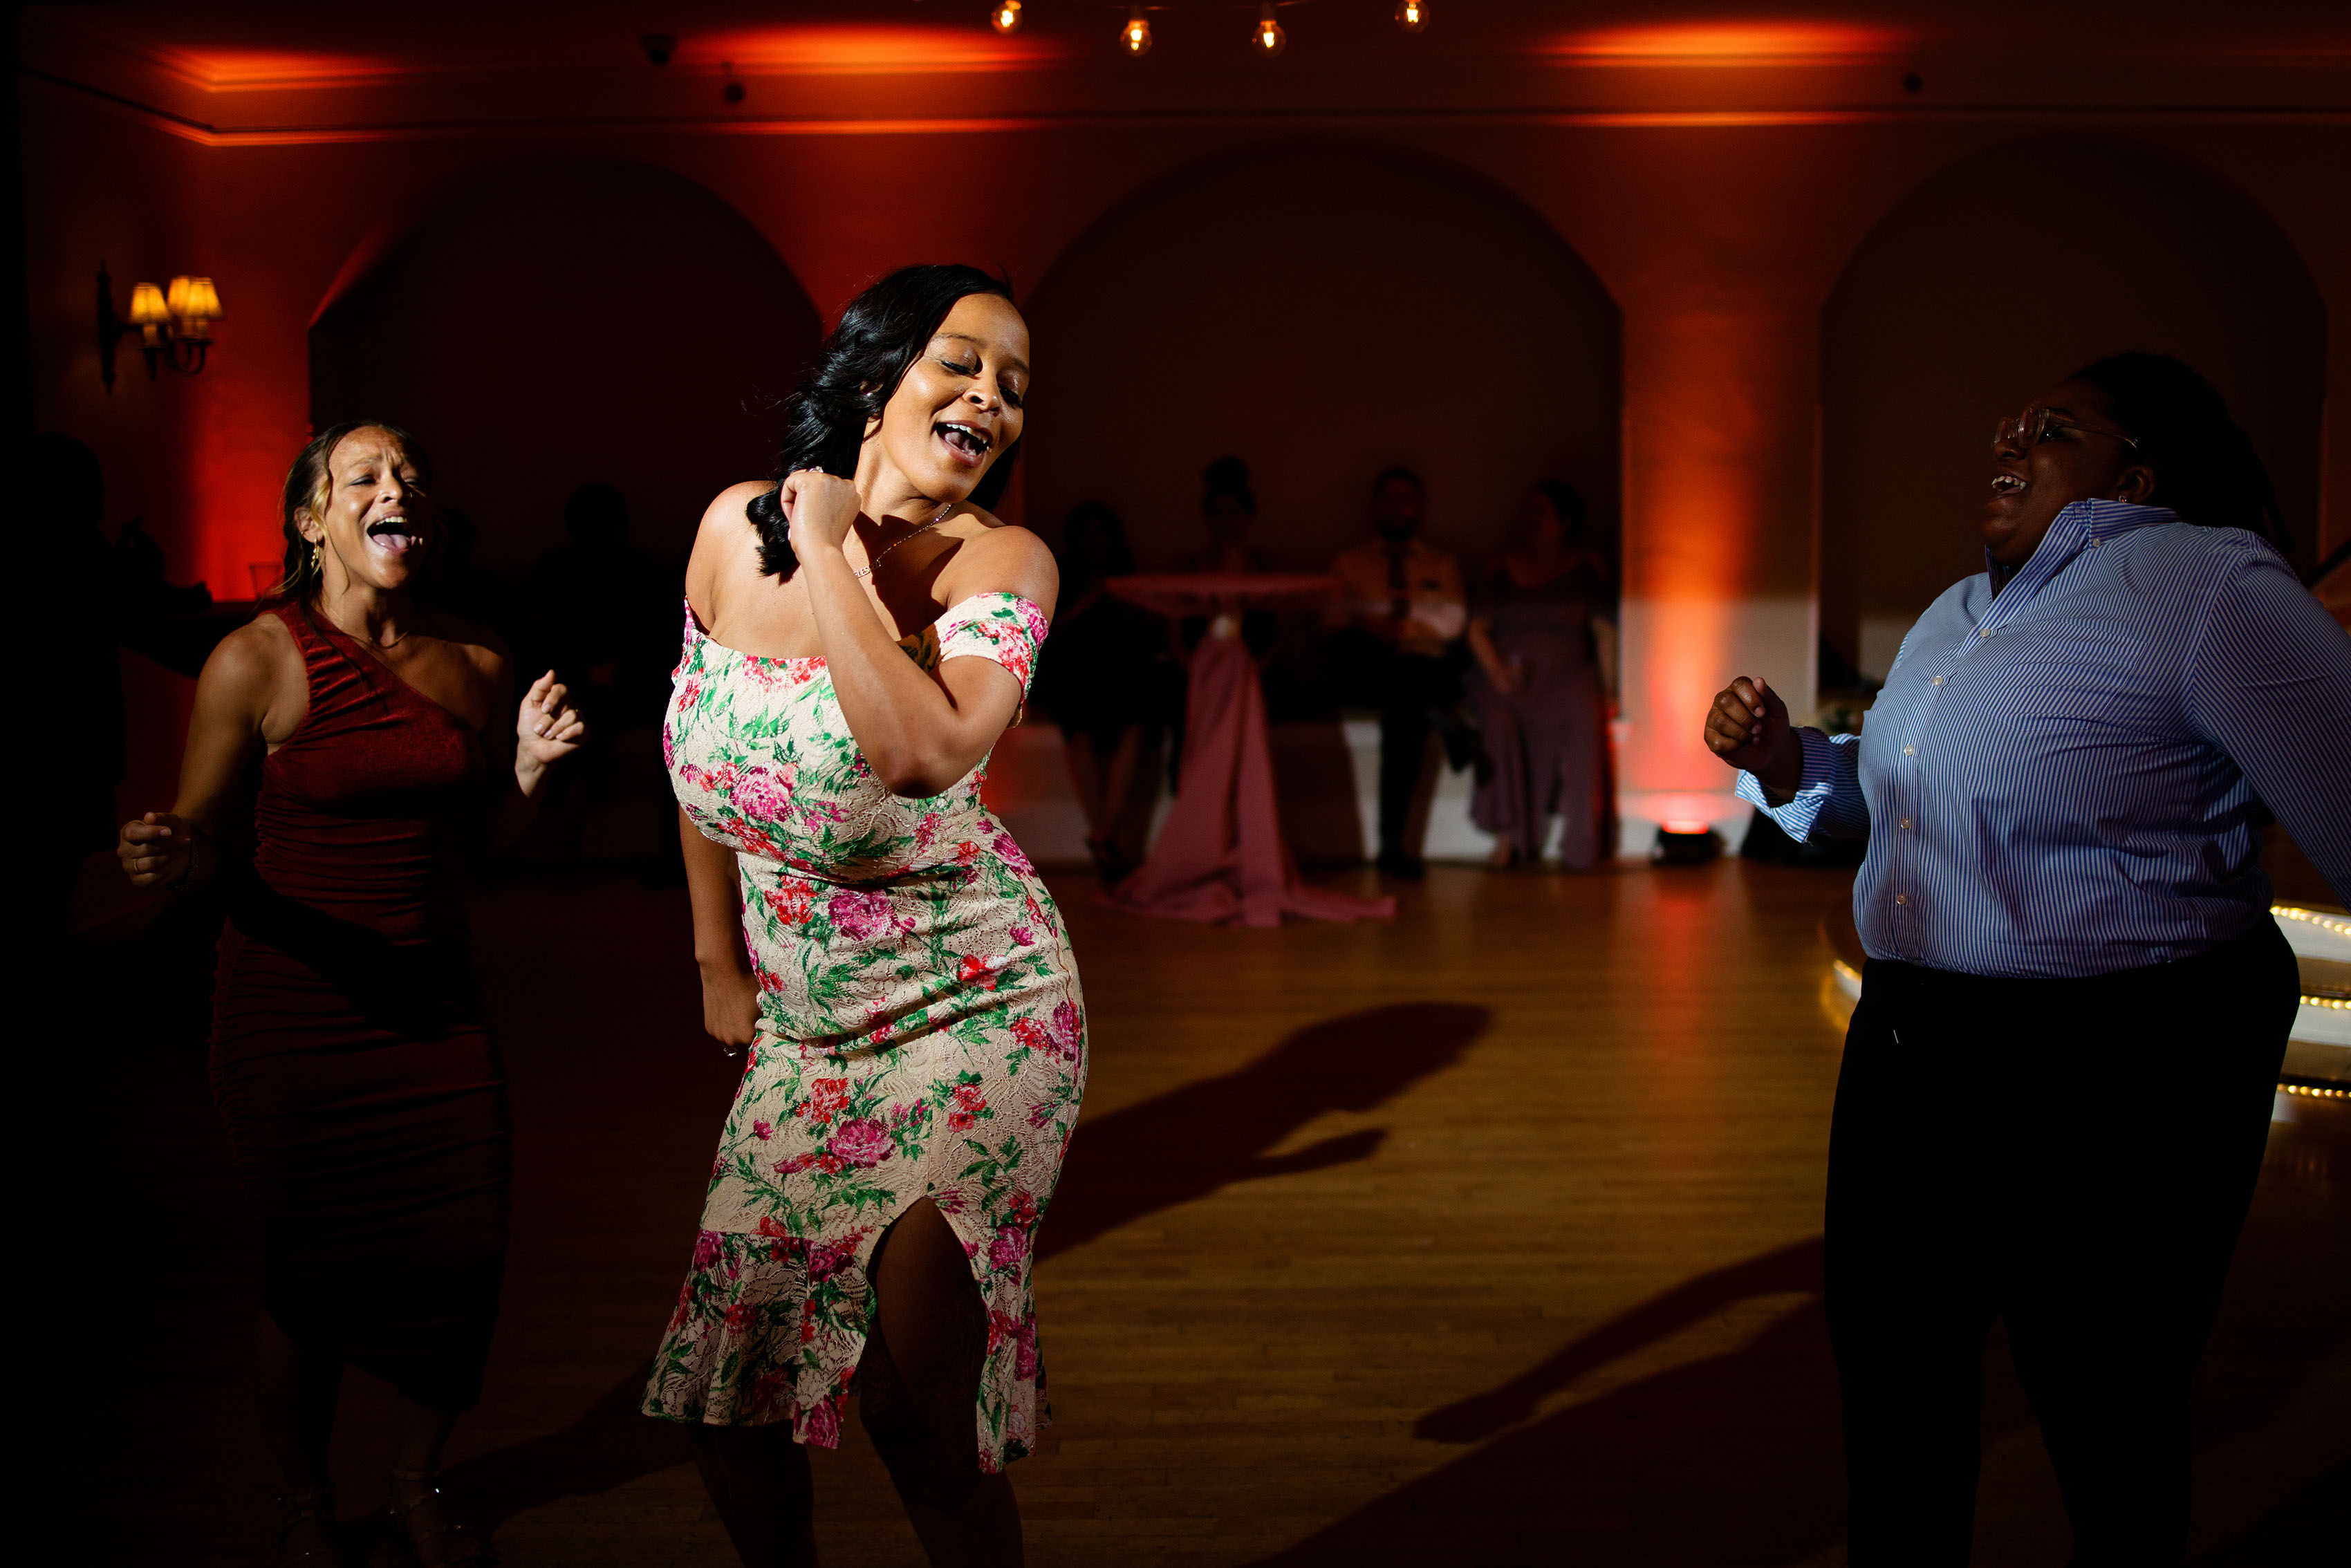 Guests dance during the wedding reception at Grant Humphrey’s Mansion